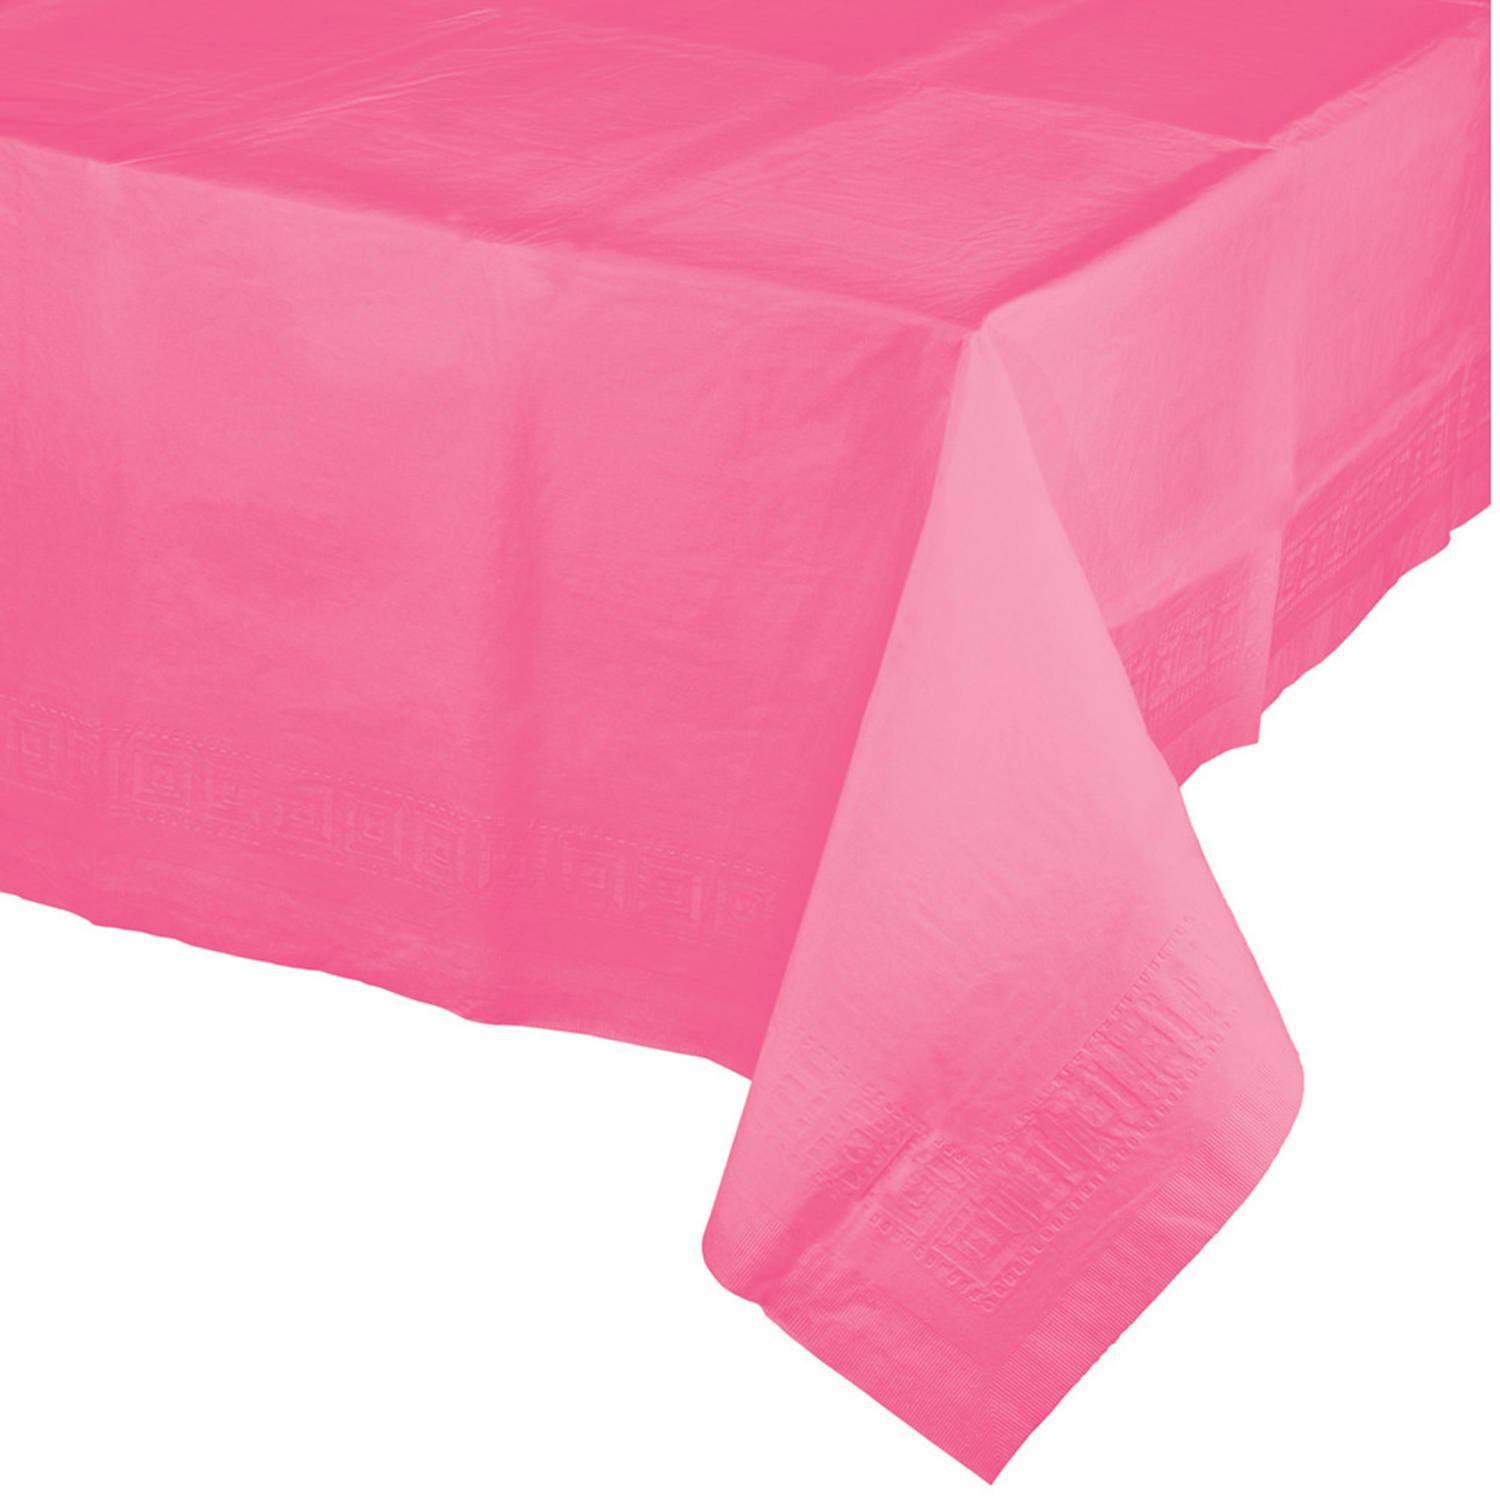 Candy Pink Table Cover - image 1 of 1